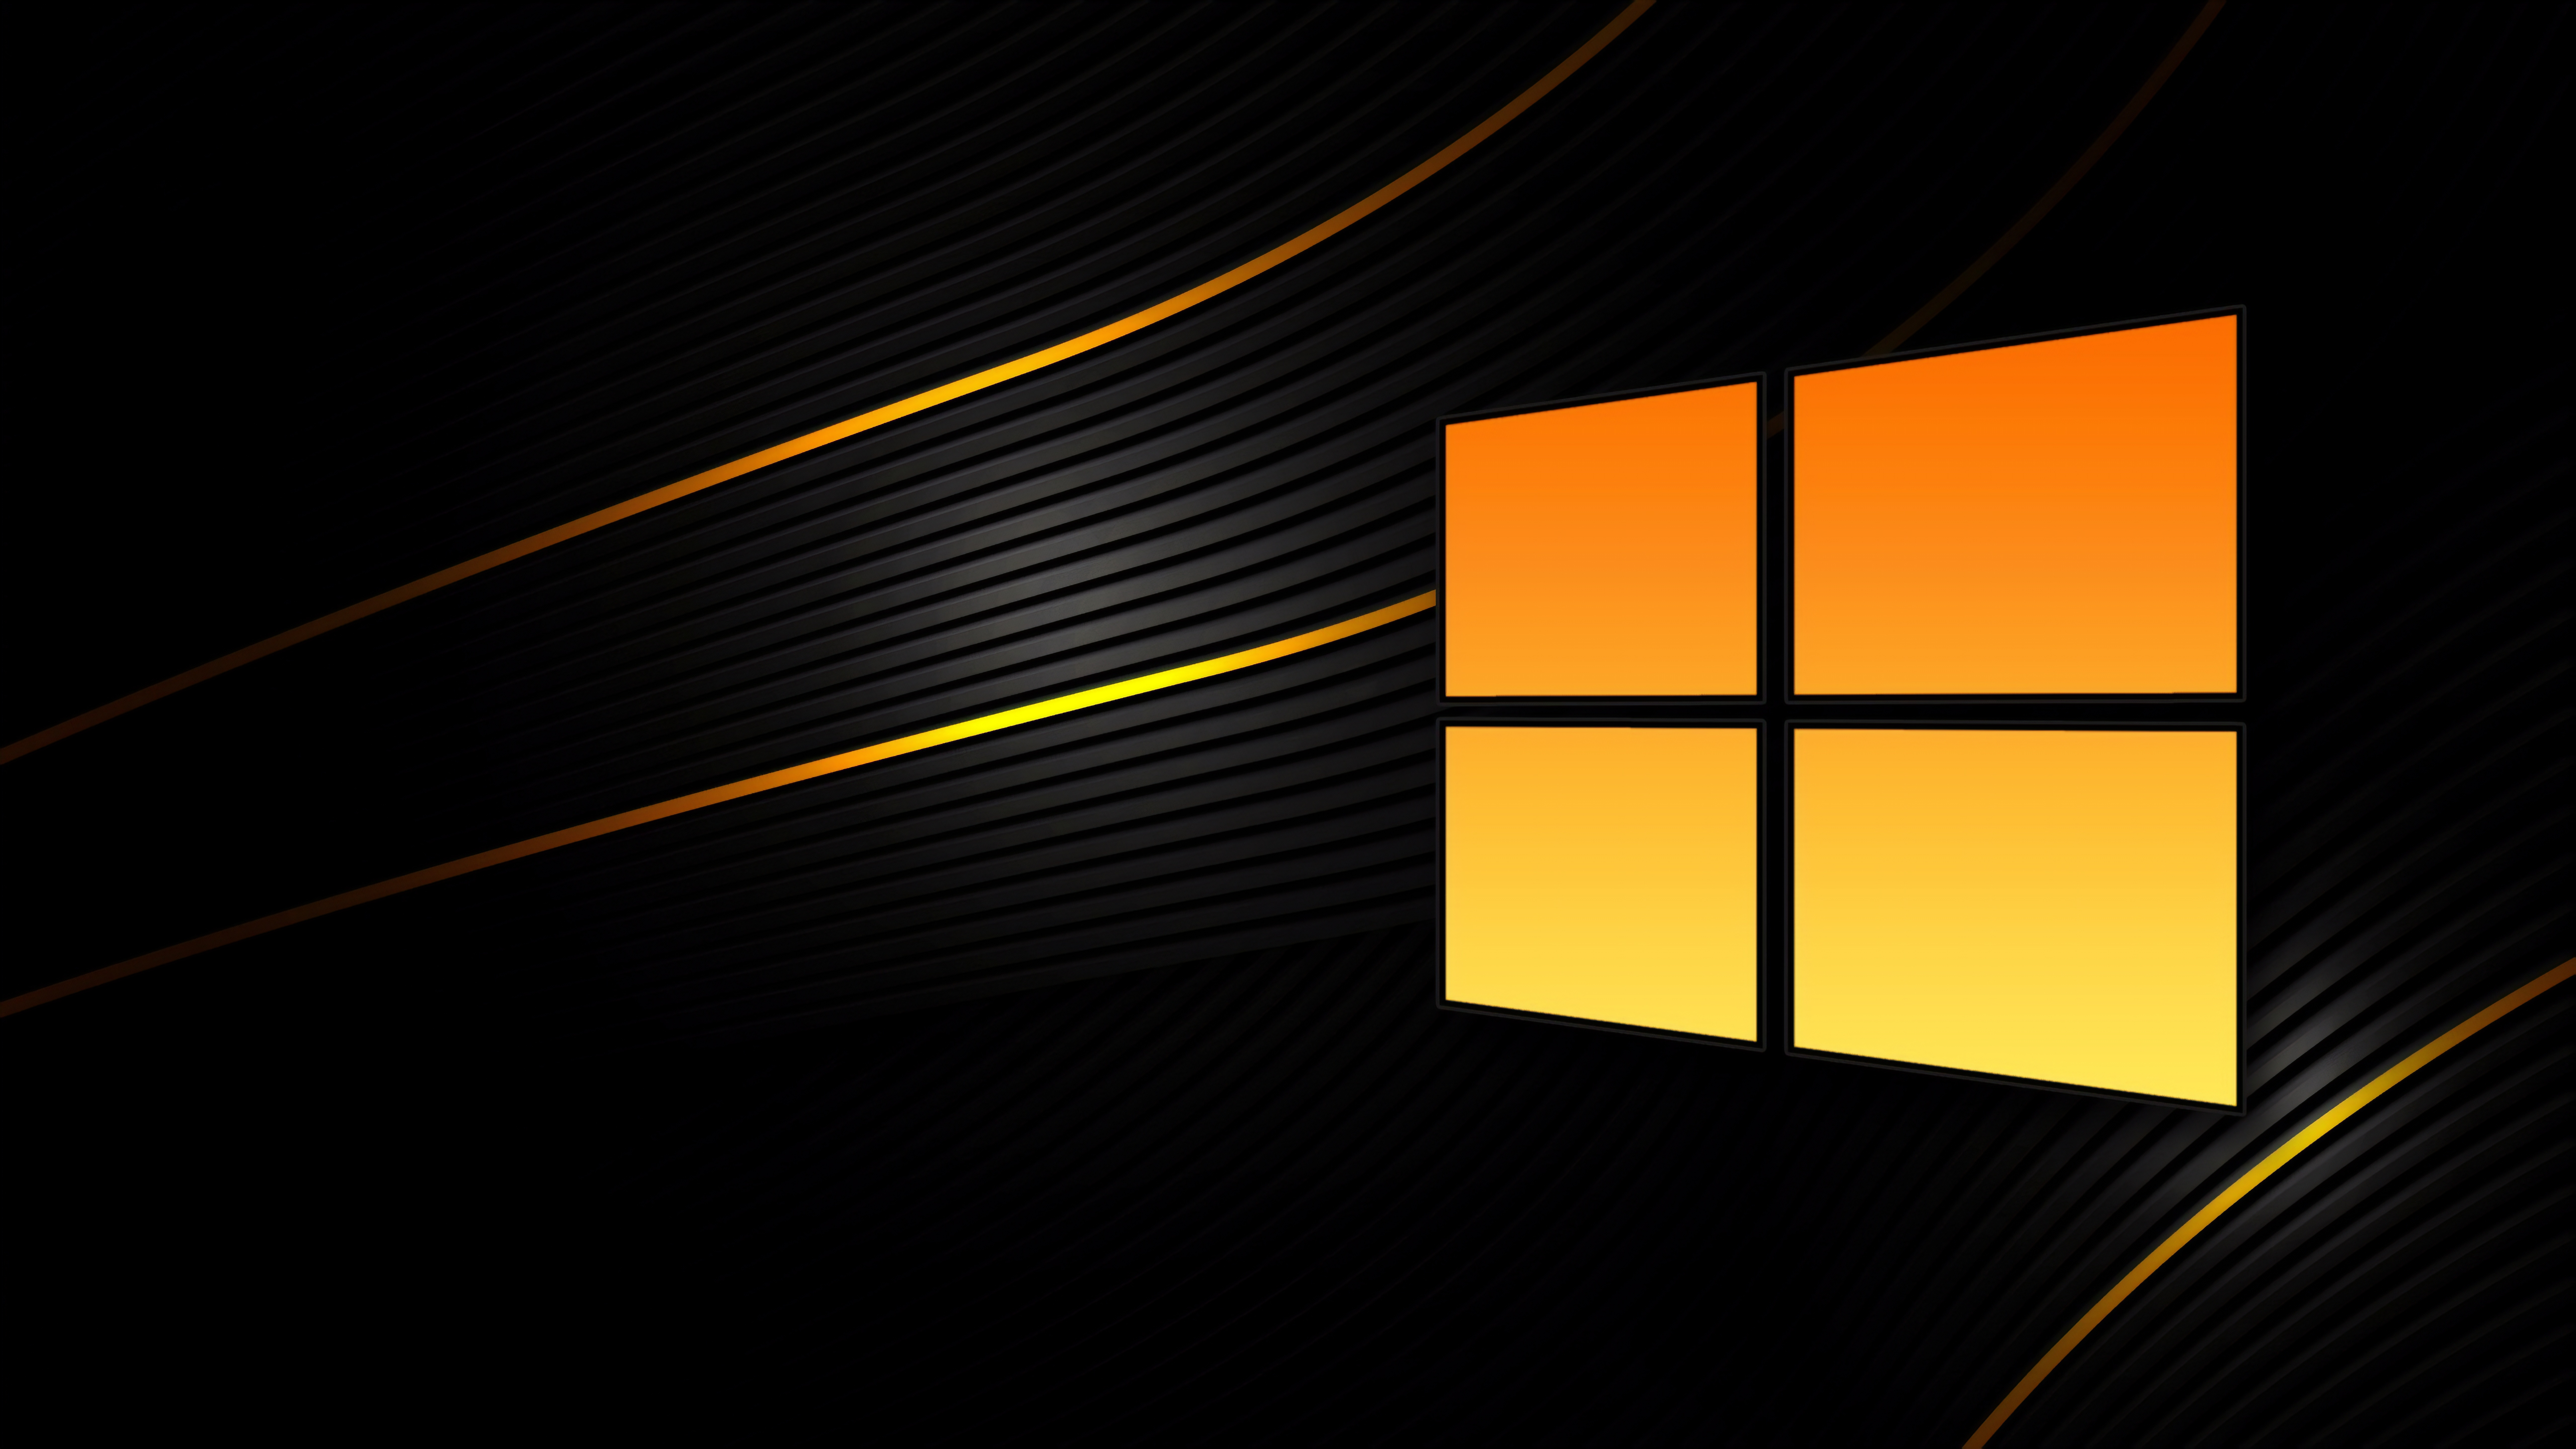 Windows 10 Wallpaper 4K, Black background, Abstract, Yellow, 5K, 8K ... Full Hd Wallpapers For Windows 8 1920x1080